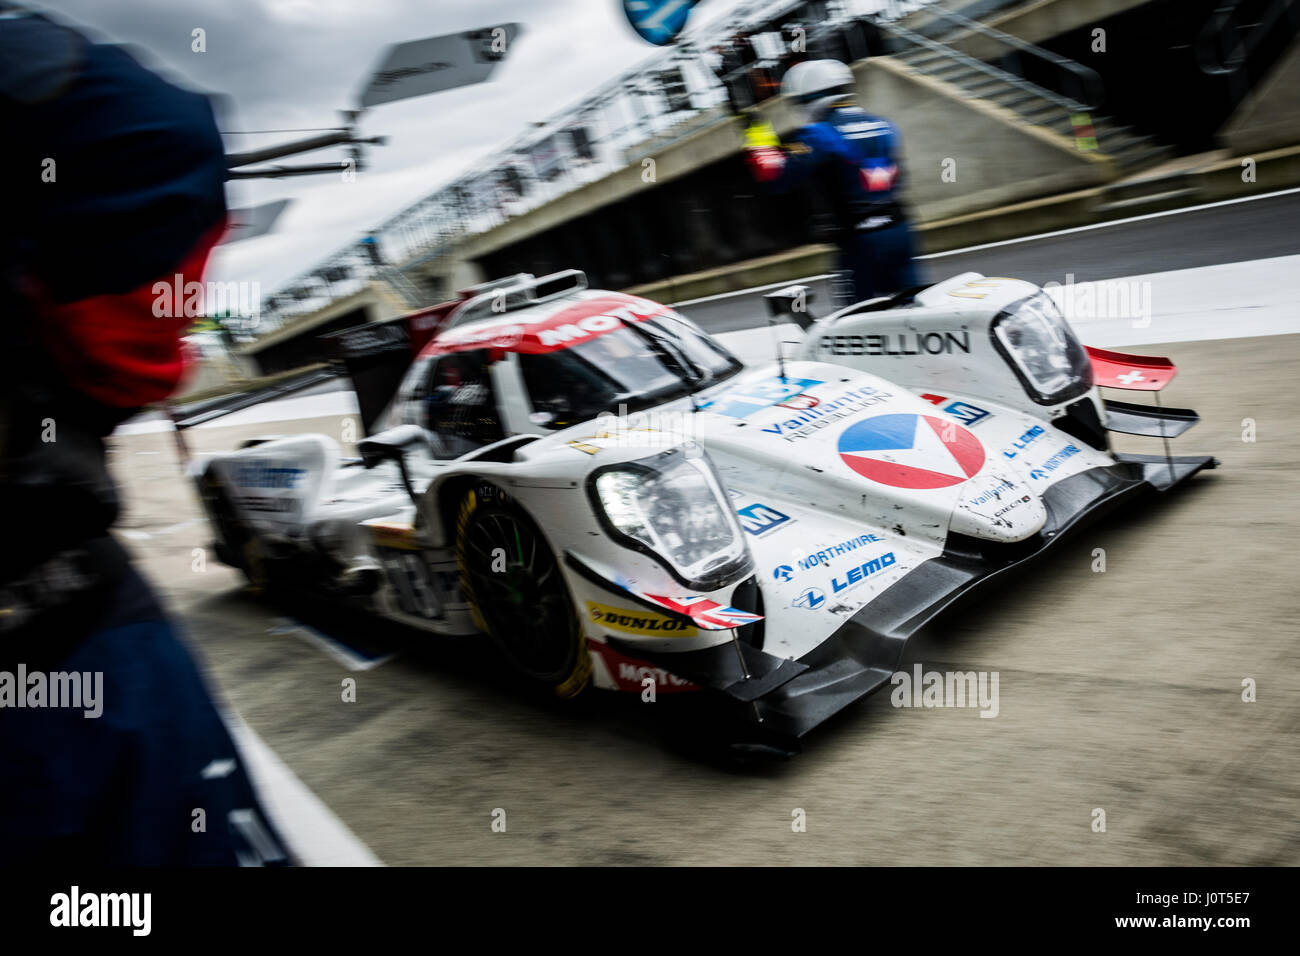 Towcester, Northamptonshire, UK. 16th Apr, 2017. FIA WEC racing team Vaillante Rebellion during the 6 Hours of Silverstone of the FIA World Endurance Championship Autograph session at Silverstone Circuit Credit: Gergo Toth/Alamy Live News Stock Photo